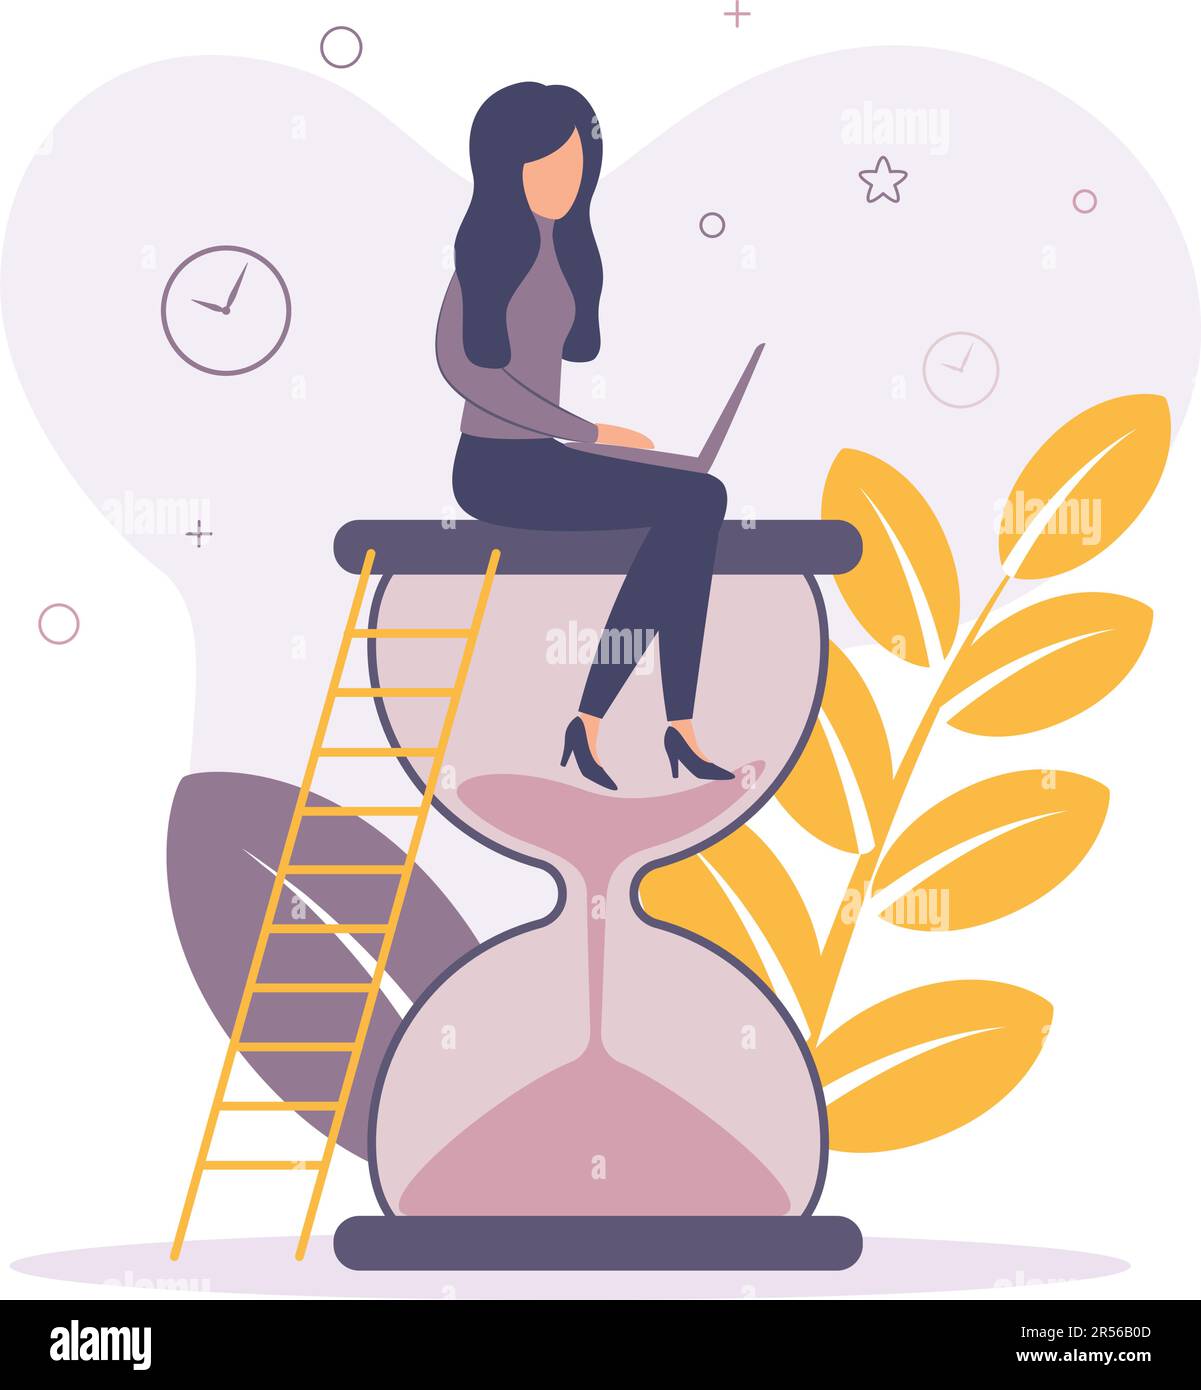 A woman is sitting on an hourglass. Woman with a laptop. Woman working on a laptop while sitting on an hourglass. Stock Vector